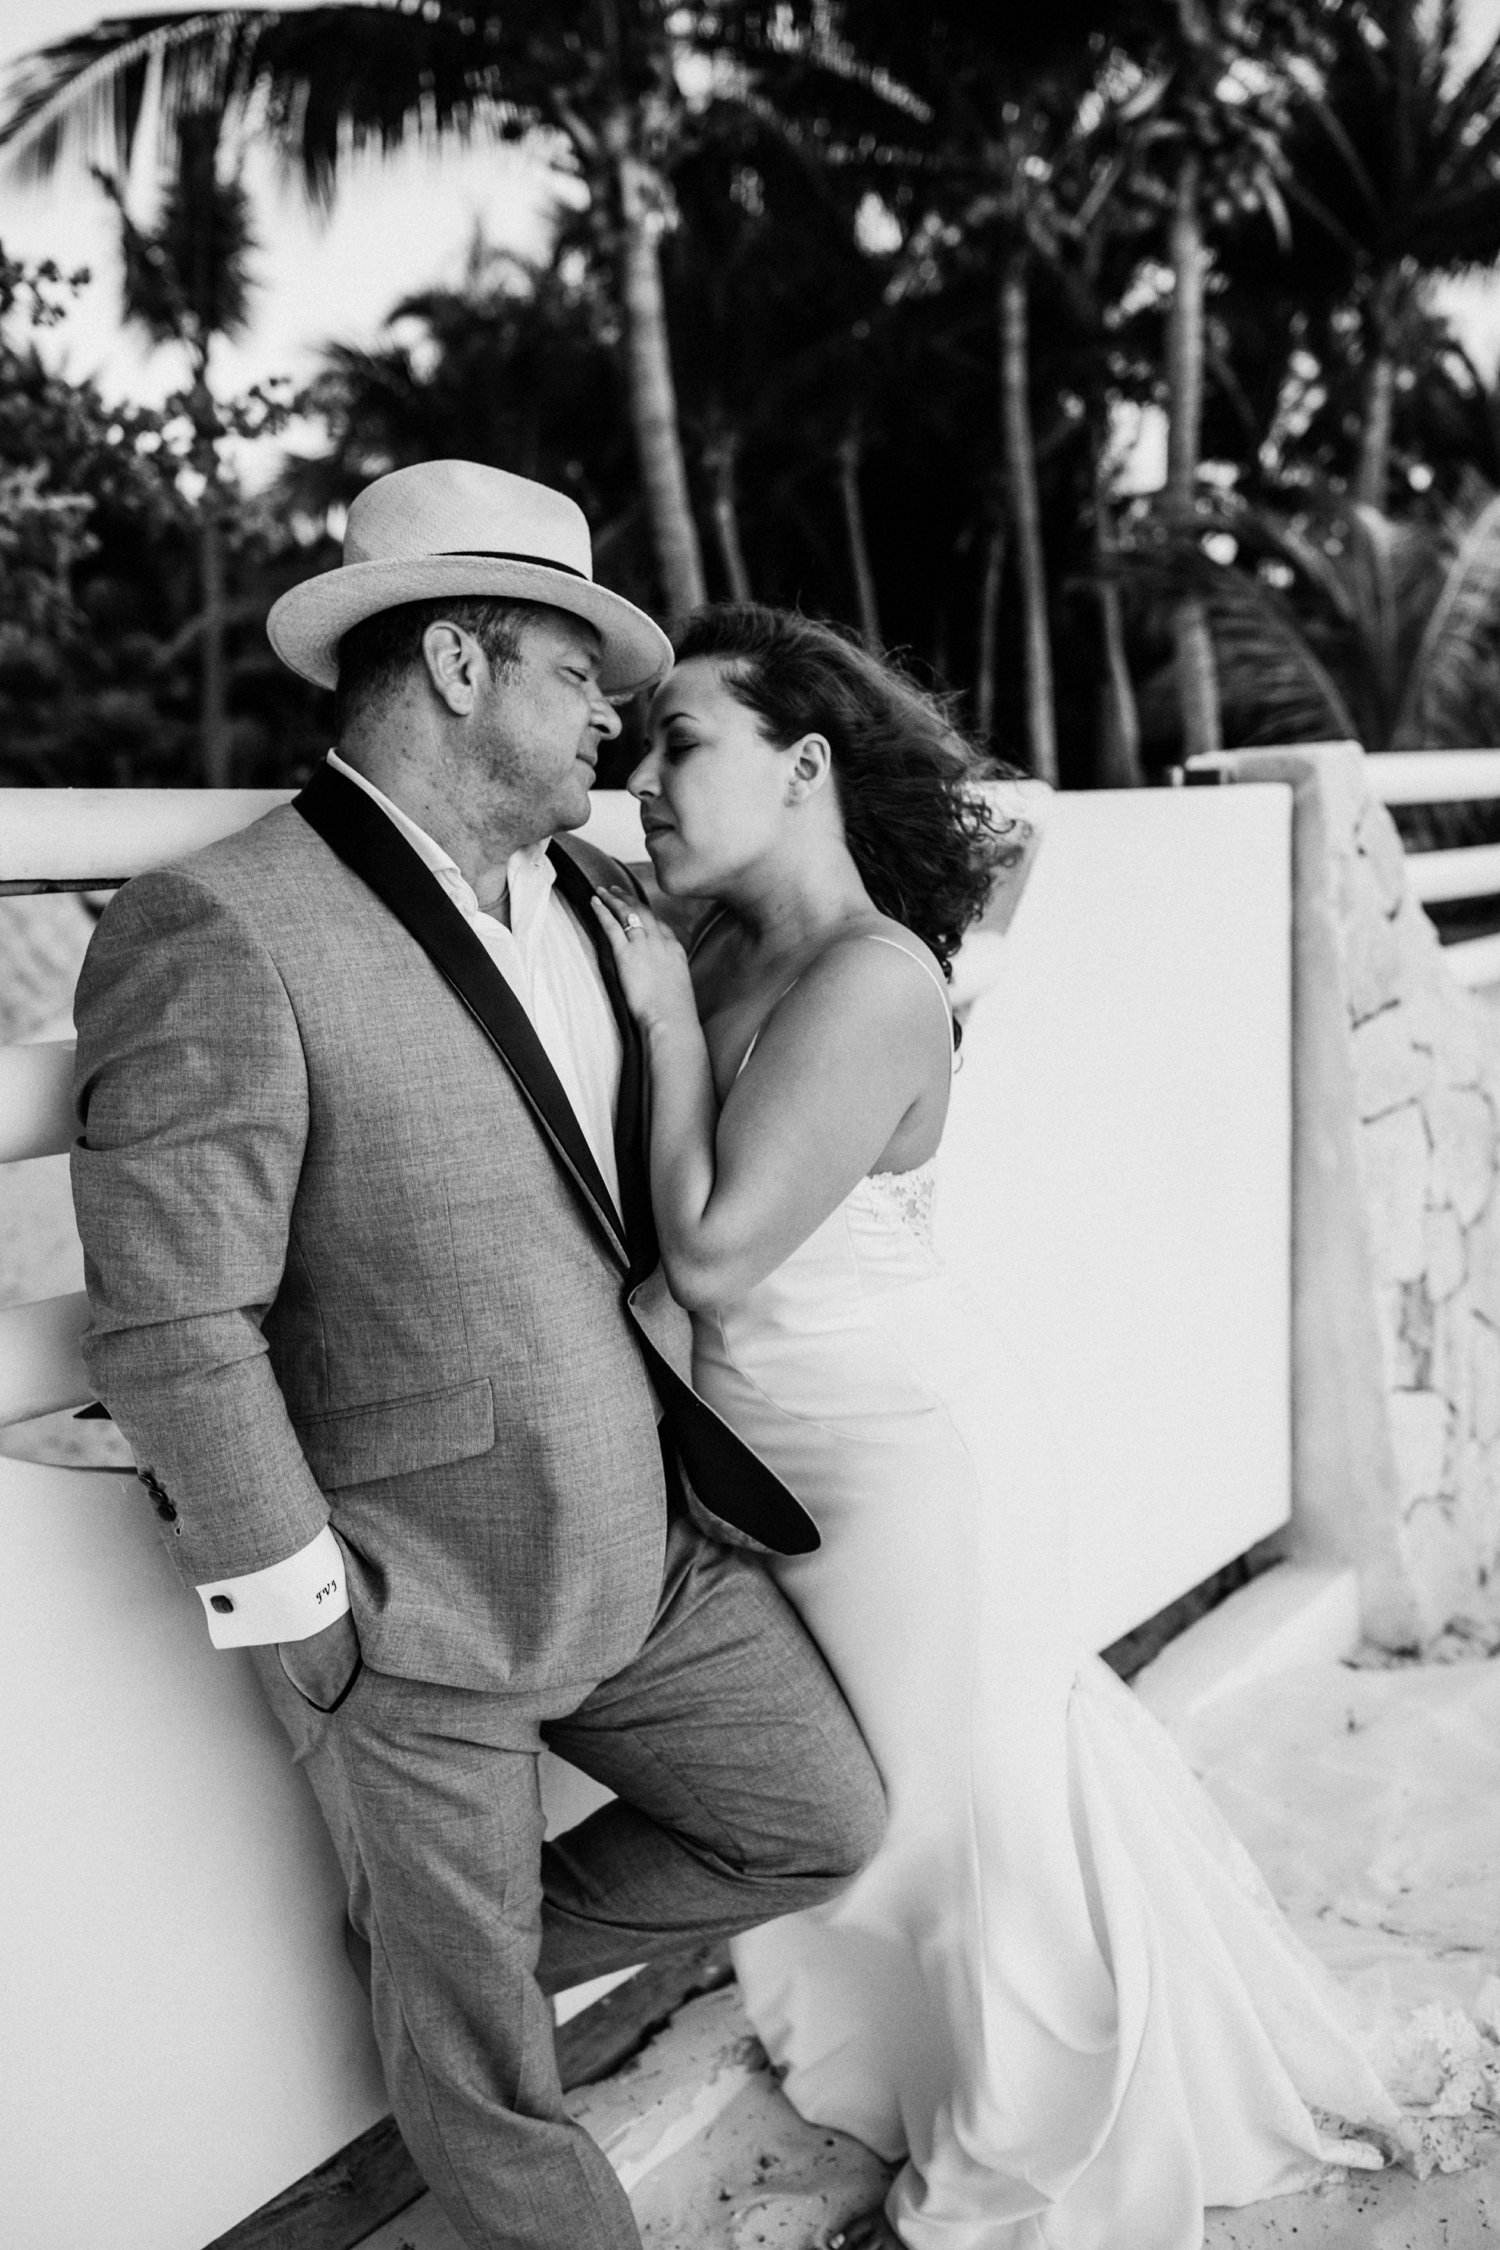  images by feliciathephotographer.com | destination wedding photographer | mexico | tropical | fiji | venue | azul beach resort | riviera maya | sunrise portraits | walking by the ocean | black and white | bride and groom | romantic | whimsical | long gown | grey suit | 